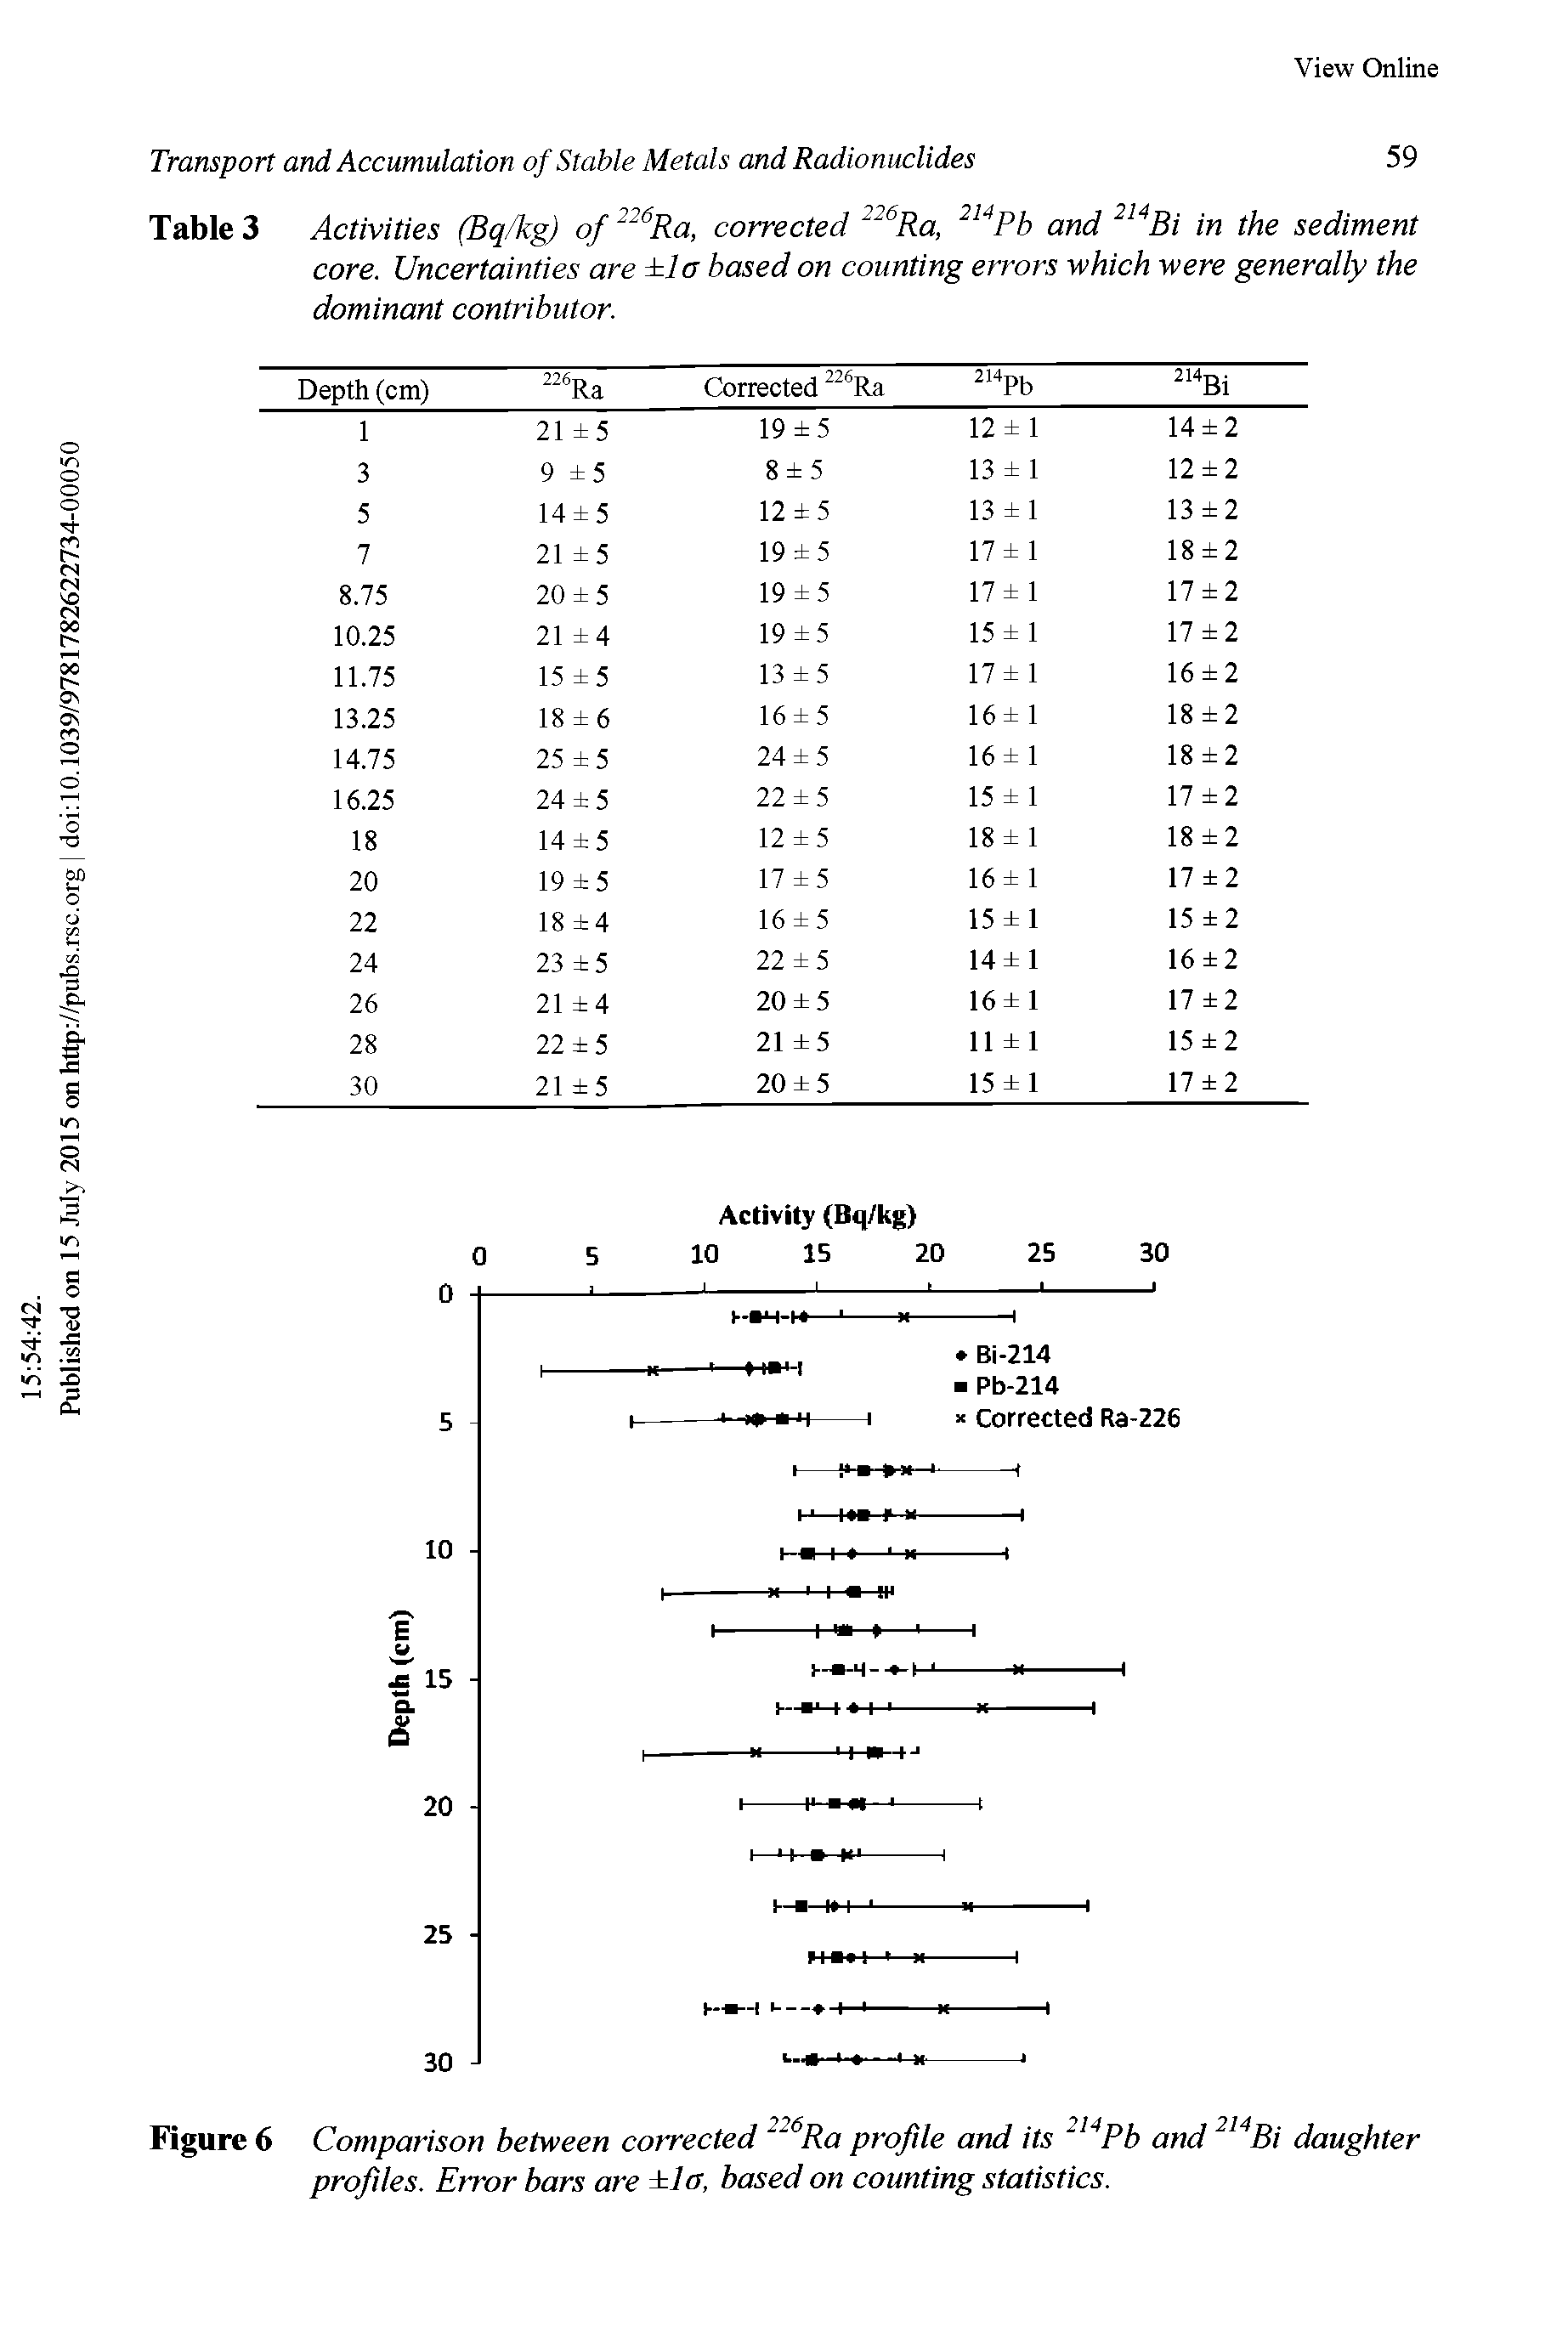 Table 3 Activities (Bq/kg) of corrected Ra, and in the sediment core. Uncertainties are la based on counting errors which were generally the dominant contributor.